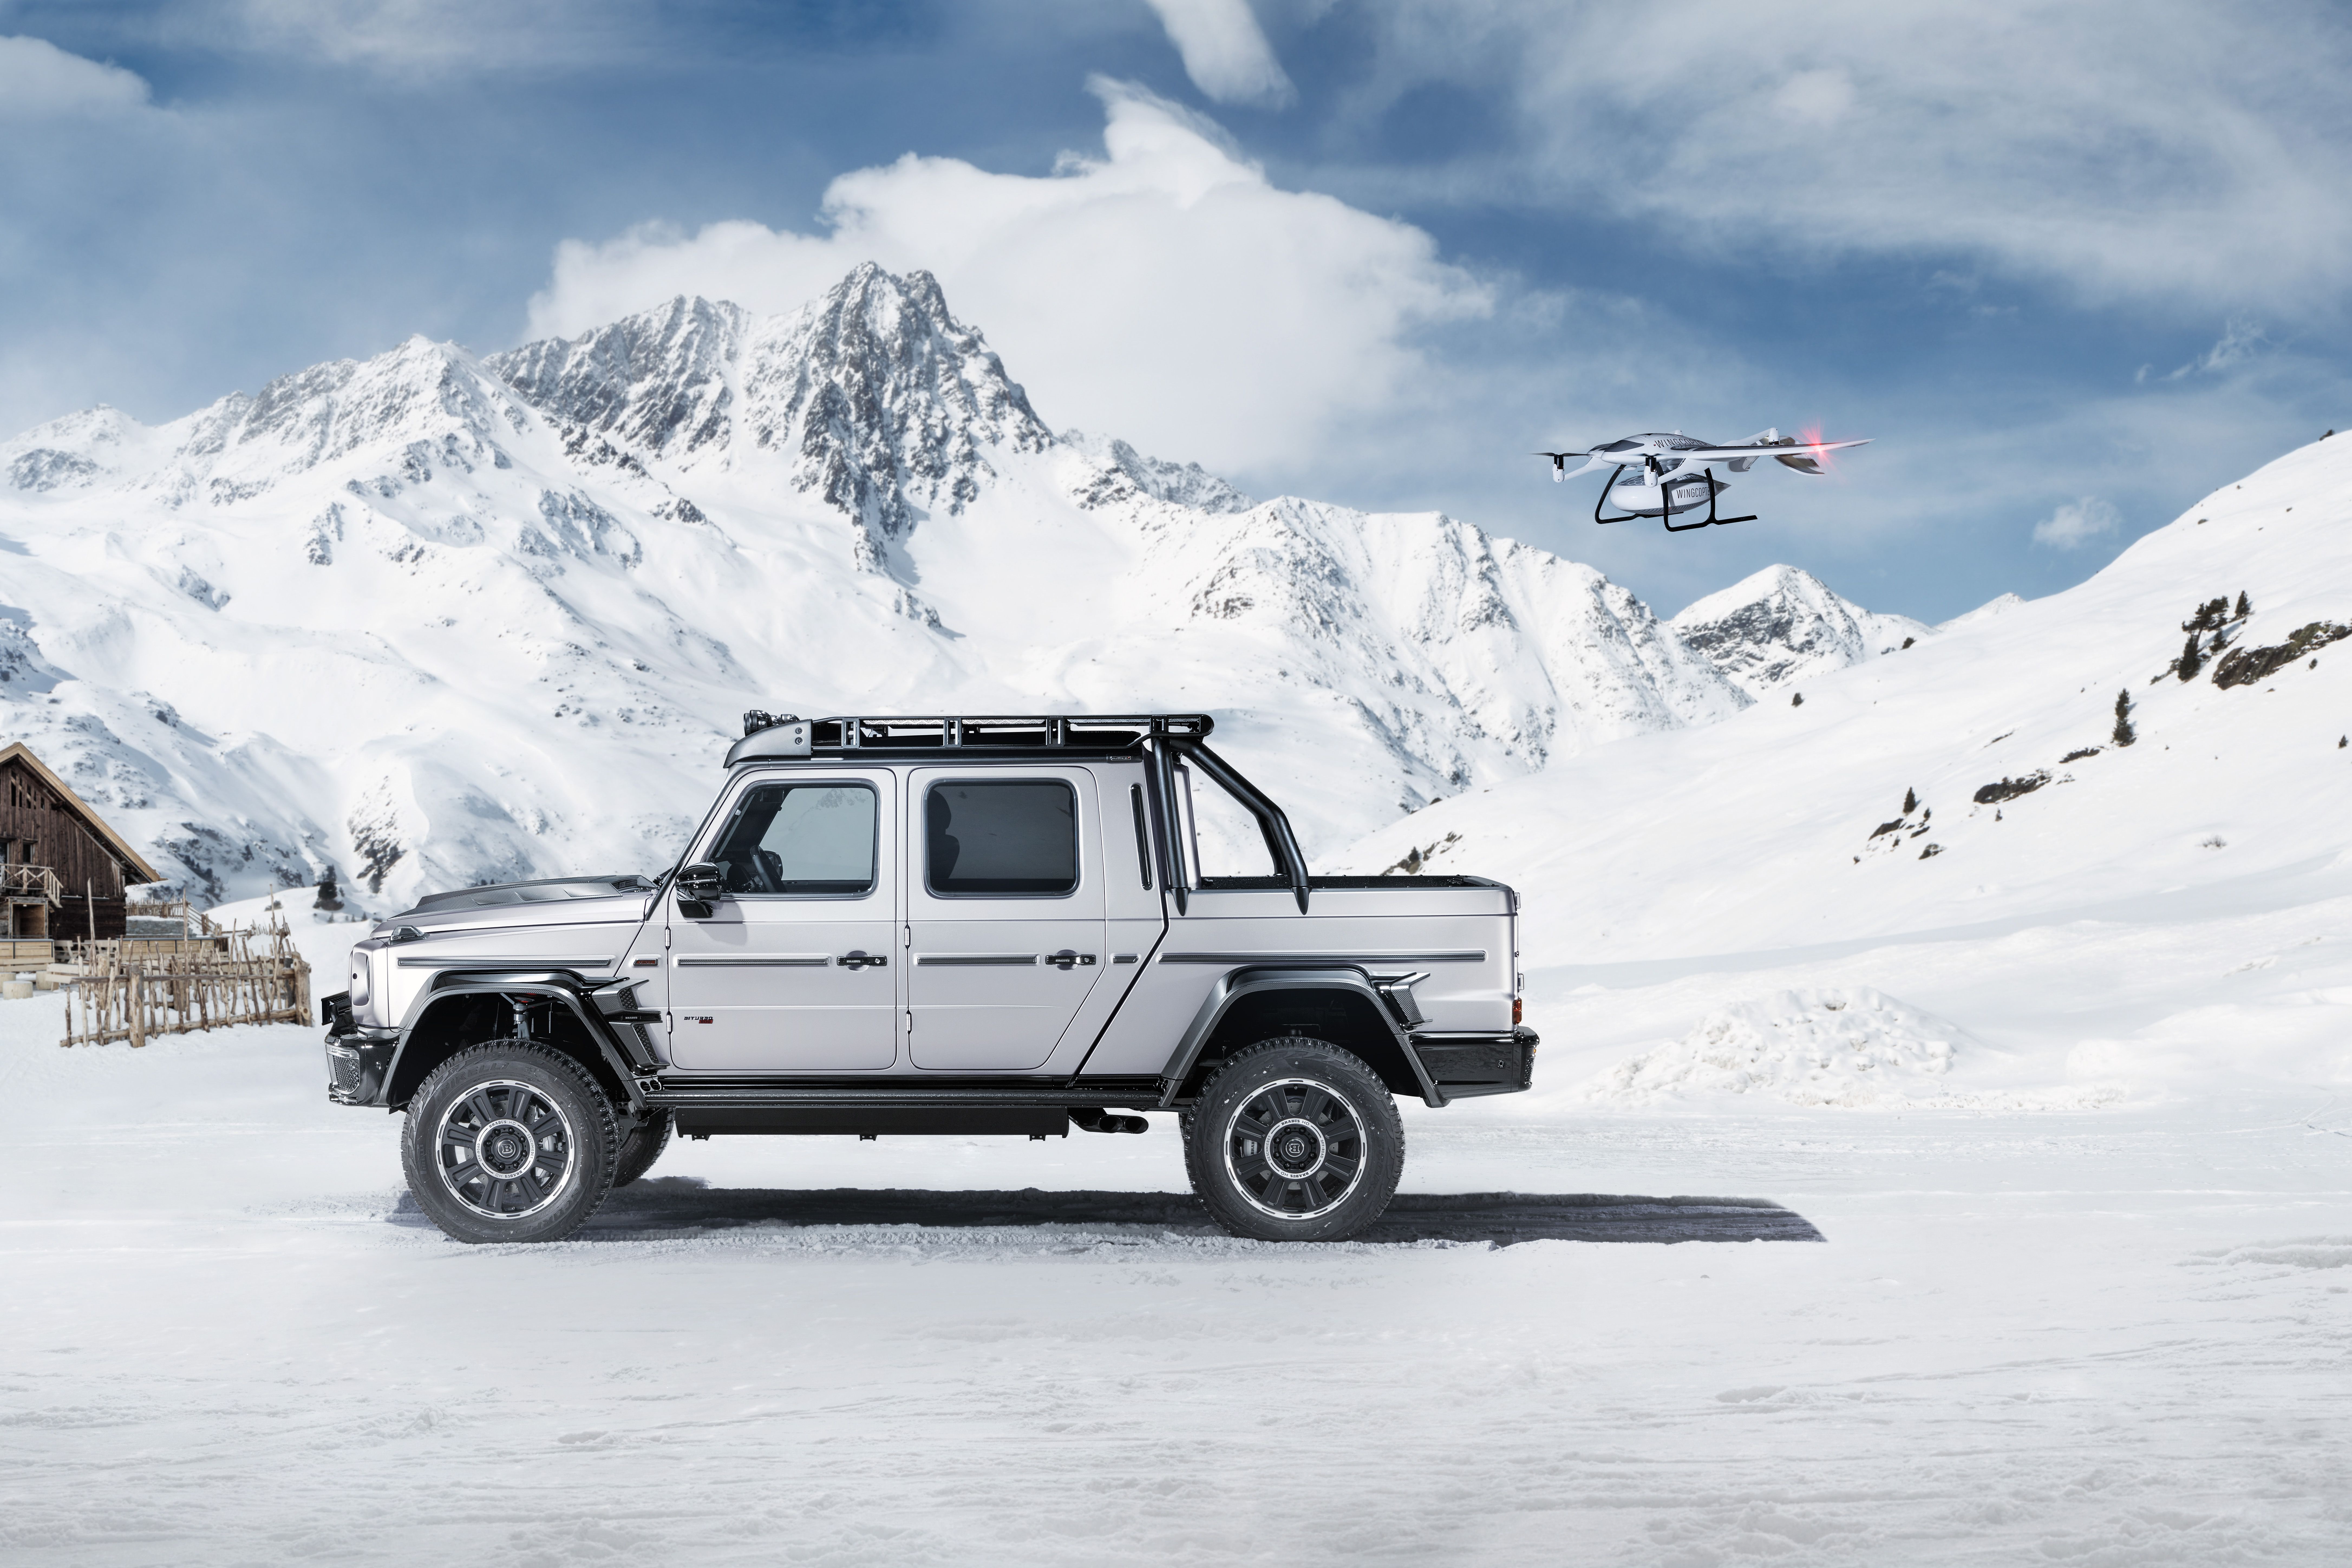 Brabus S 800 Hp Mercedes Amg G Wagen Has A Drone Landing Pad